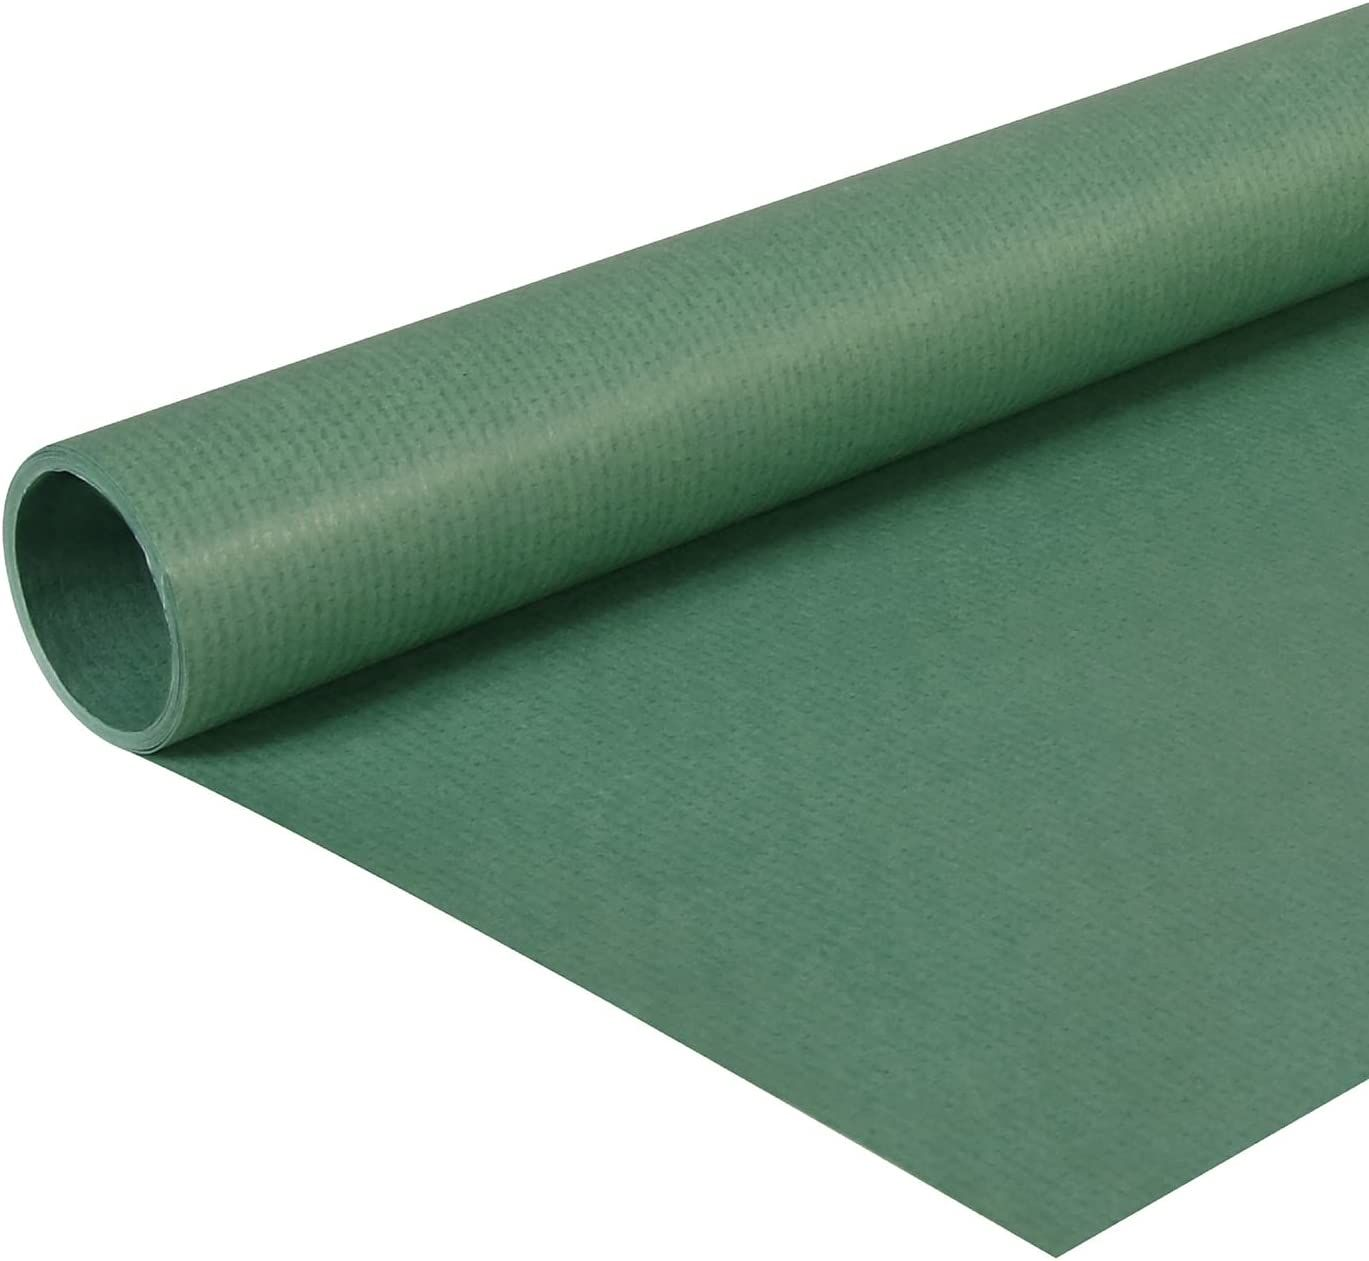 Clairefontaine Wrapping Paper Roll Dark Green 10 x 0.7M RRP £11.99 CLEARANCE XL £7.99